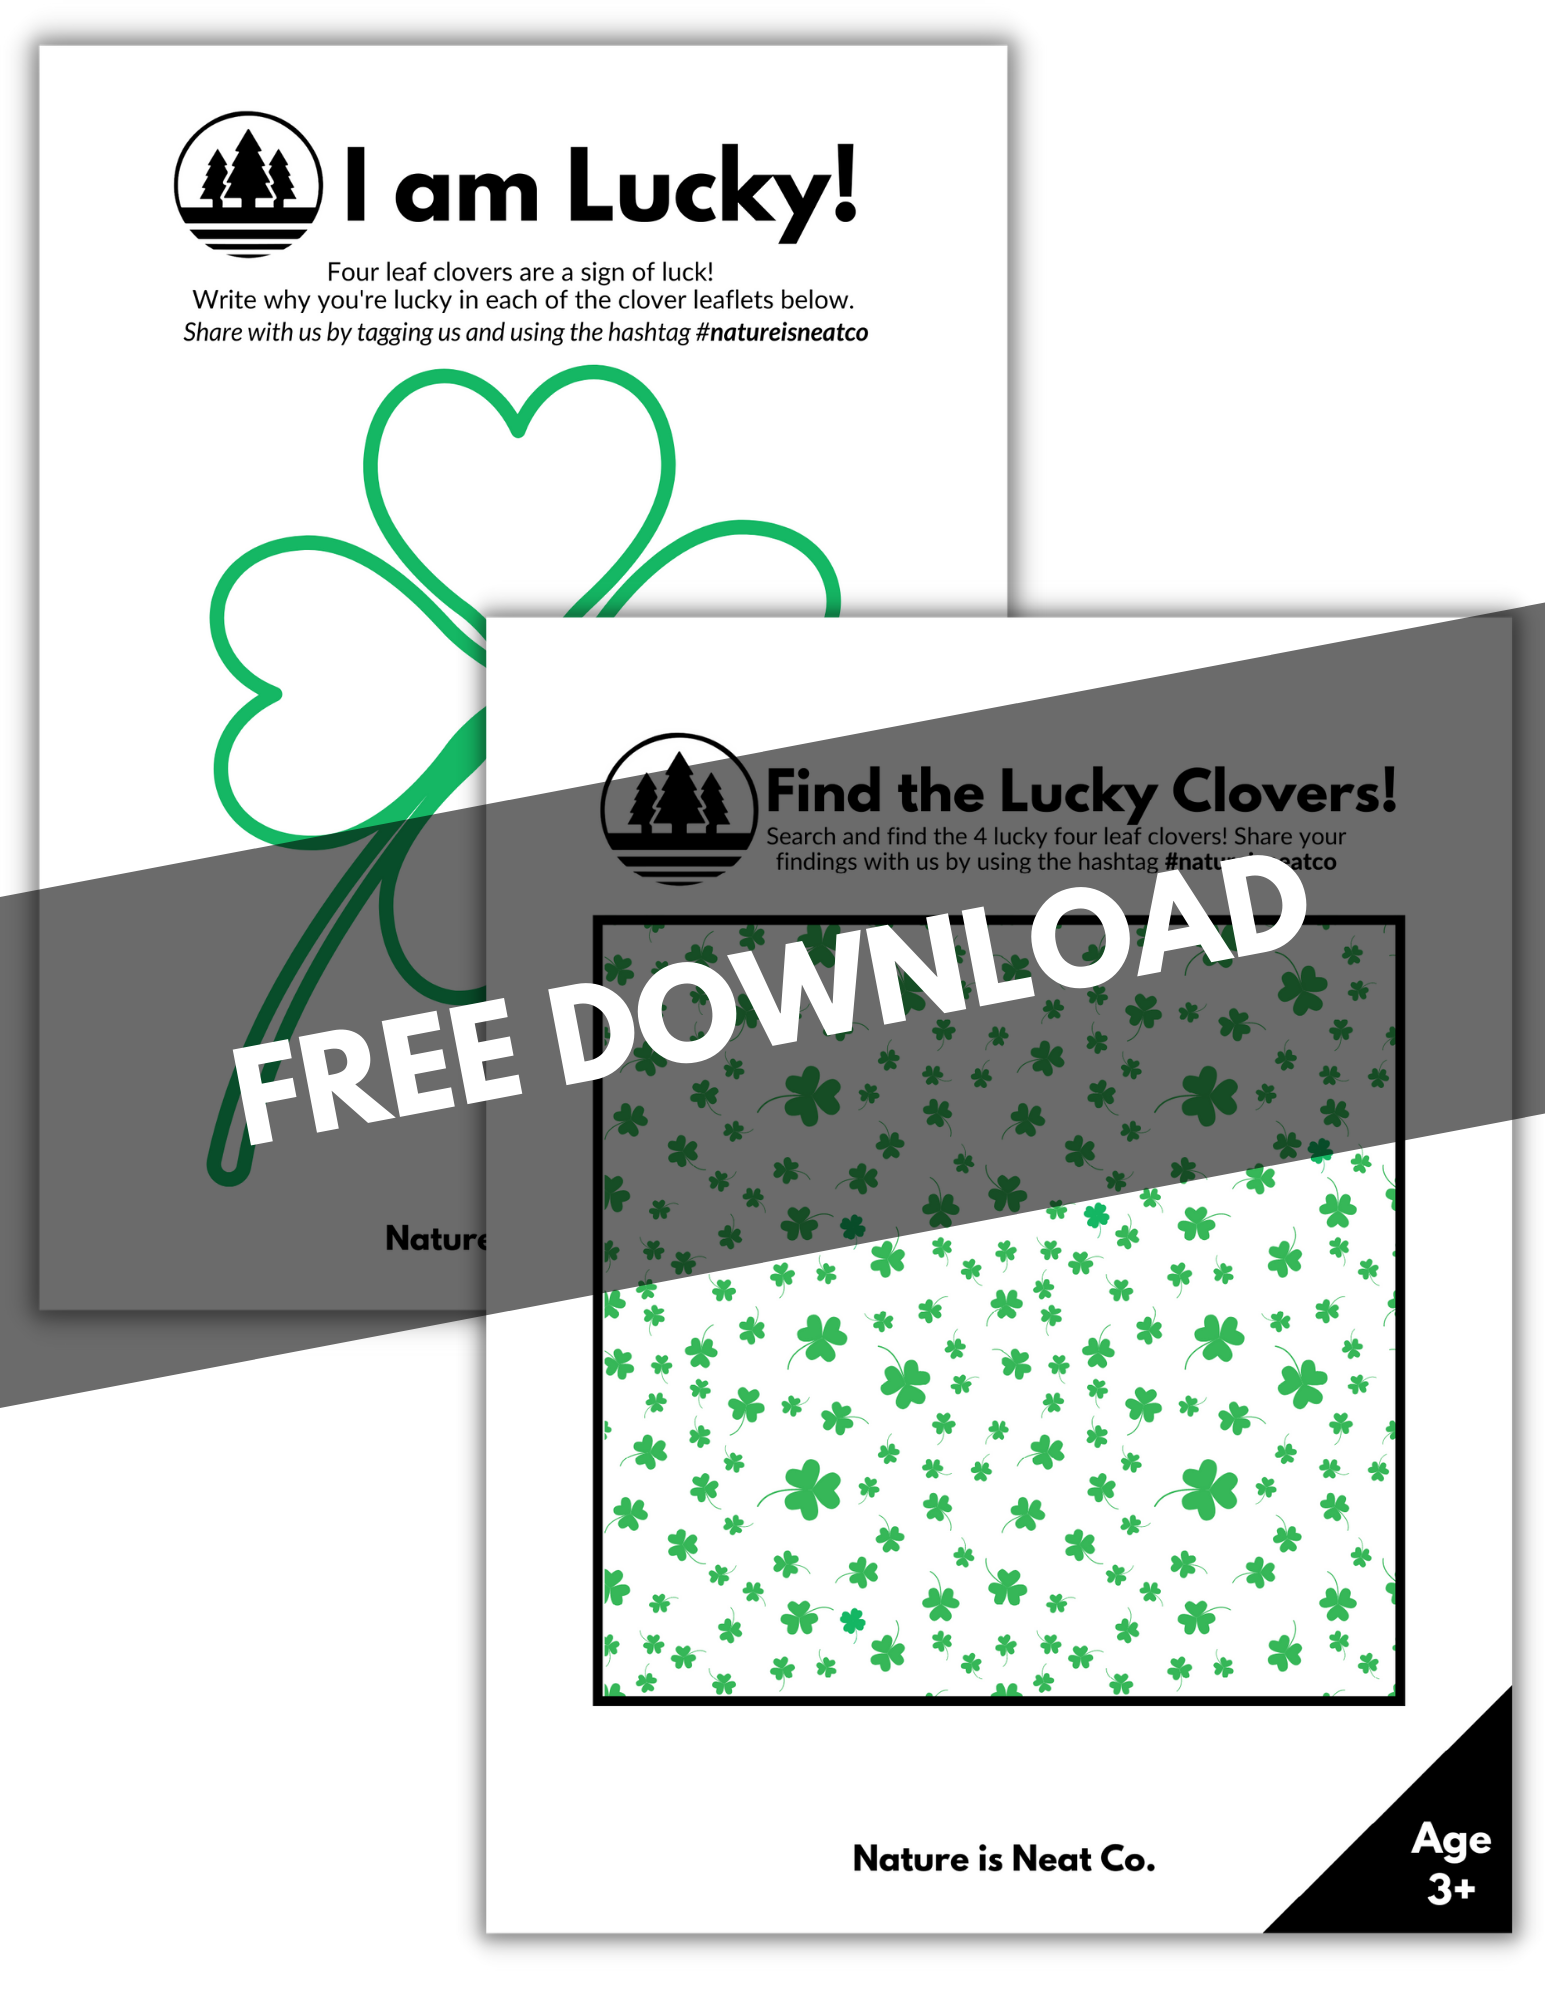 FREE: Lucky Clover + Search & Find